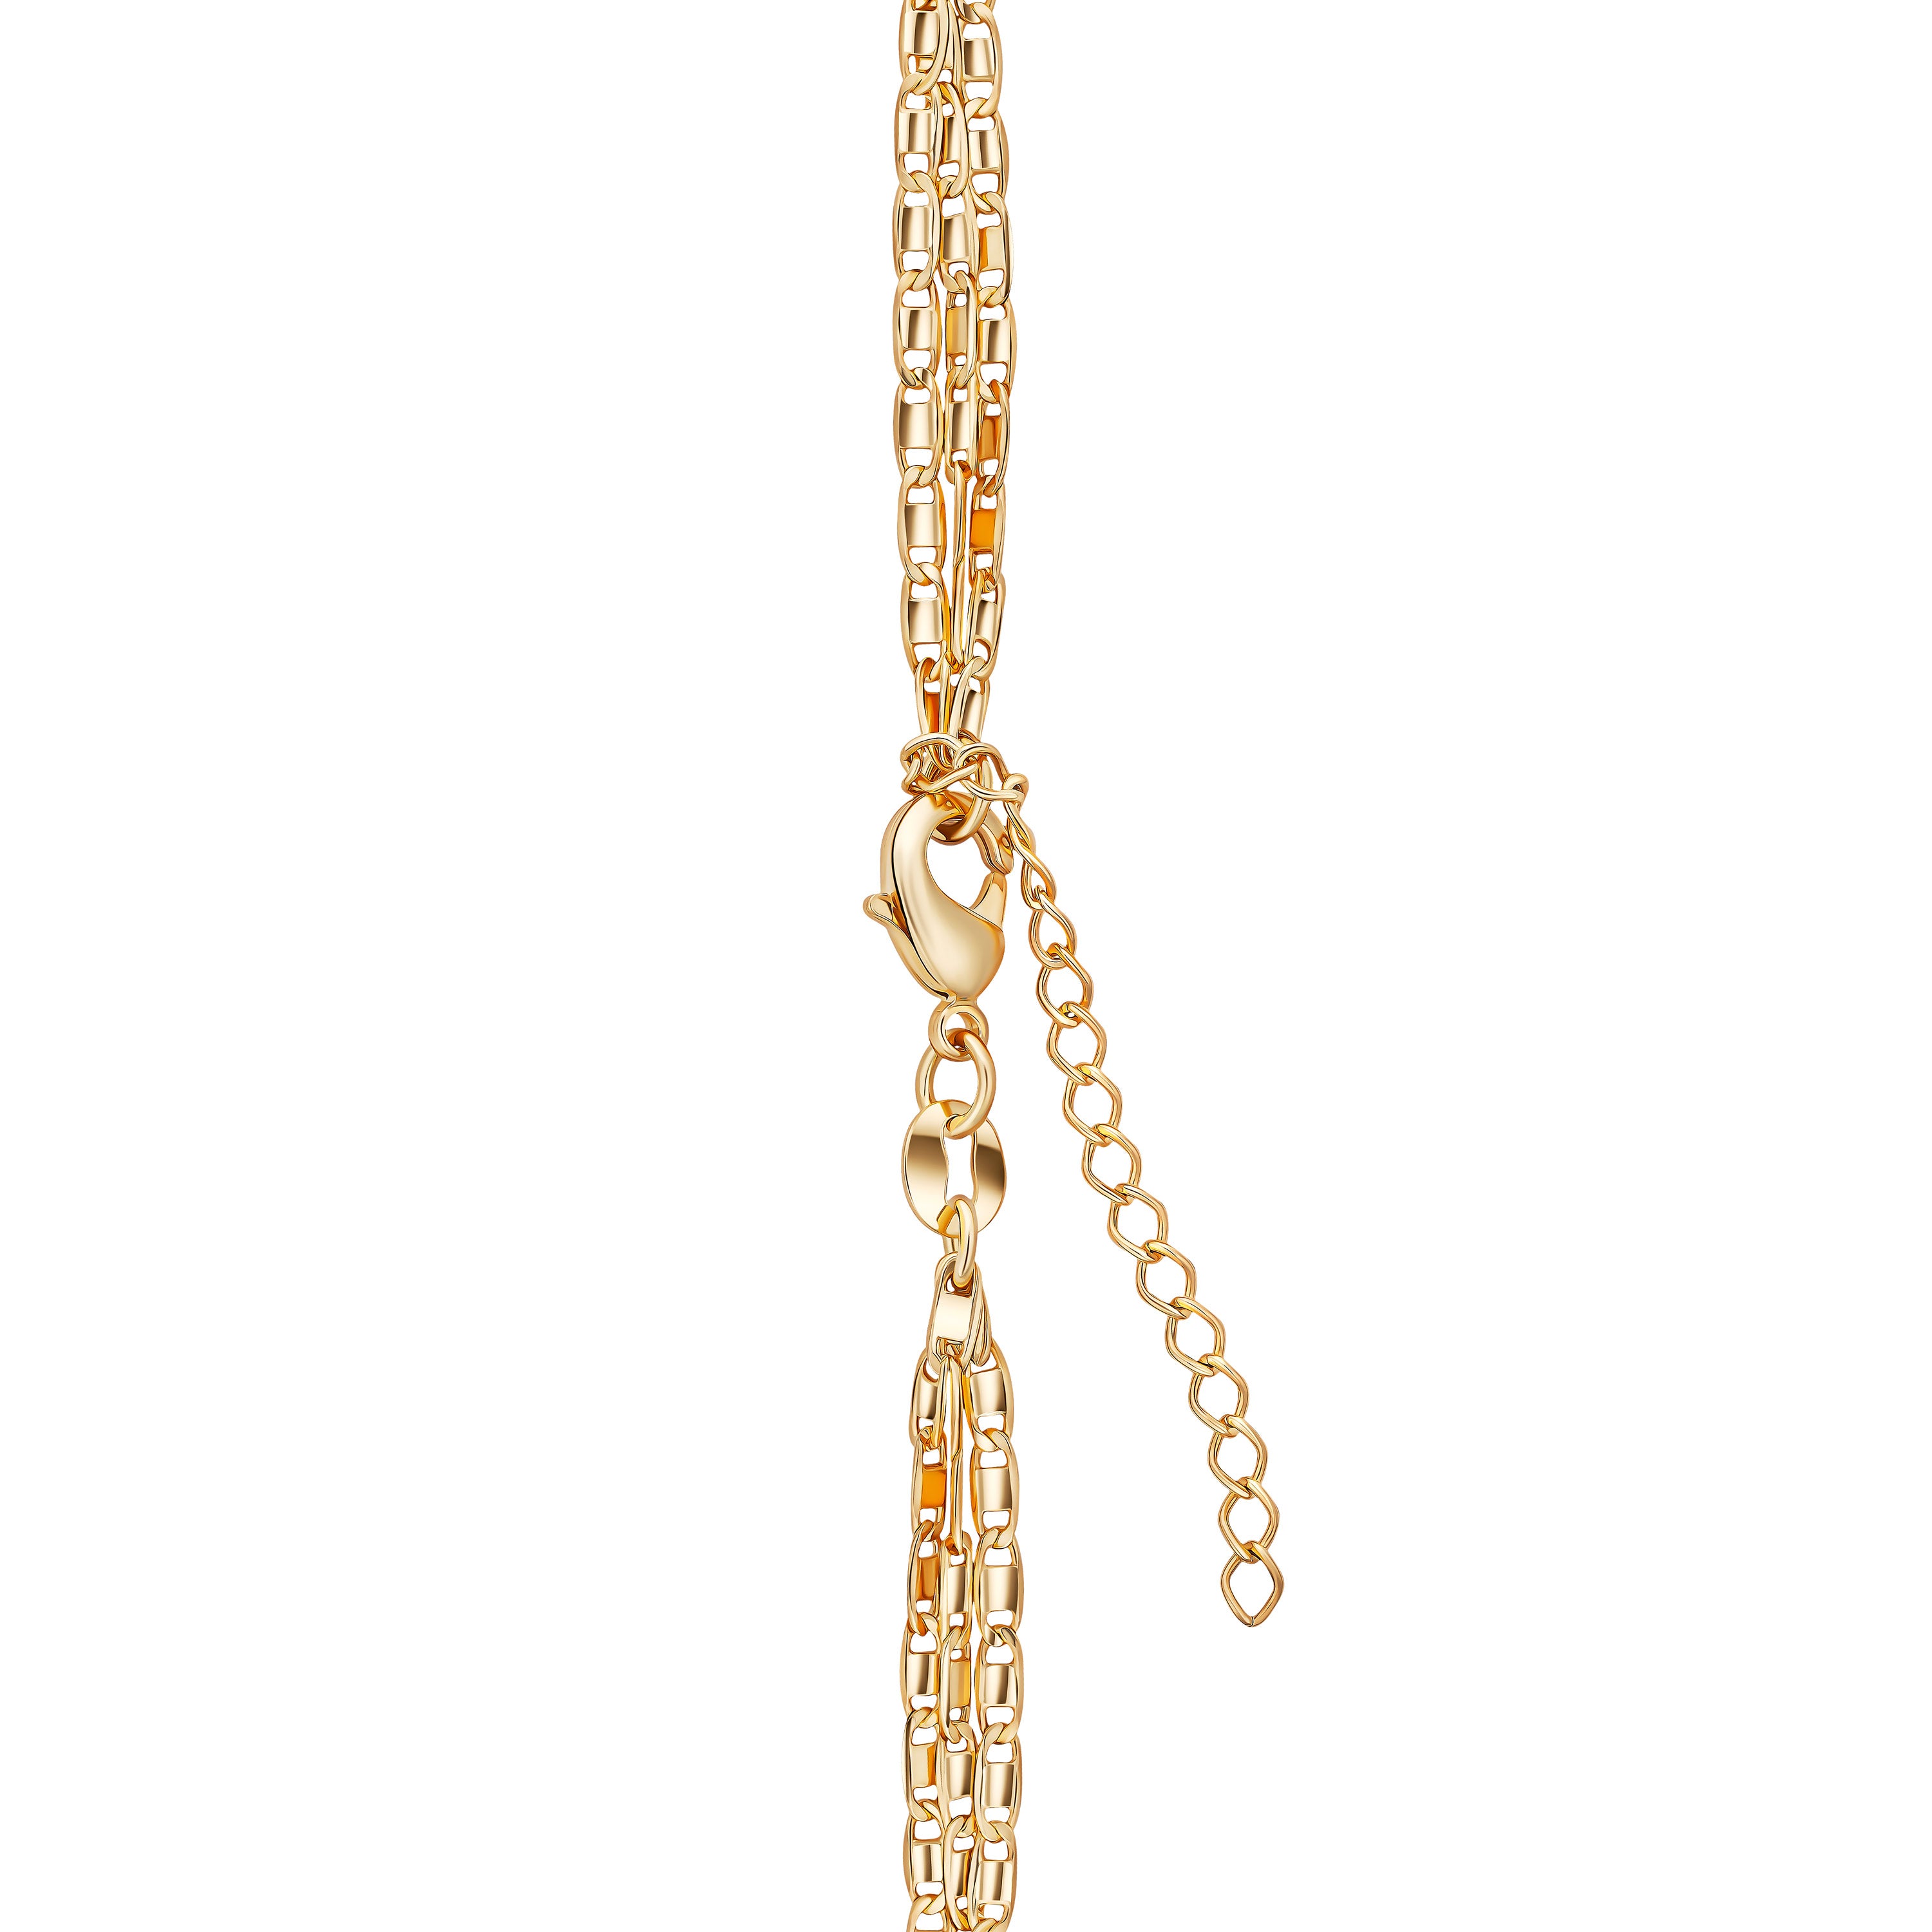 18K Gold Plated Mariner Layered Necklace, 16-20 inches, with a 2 inch extension